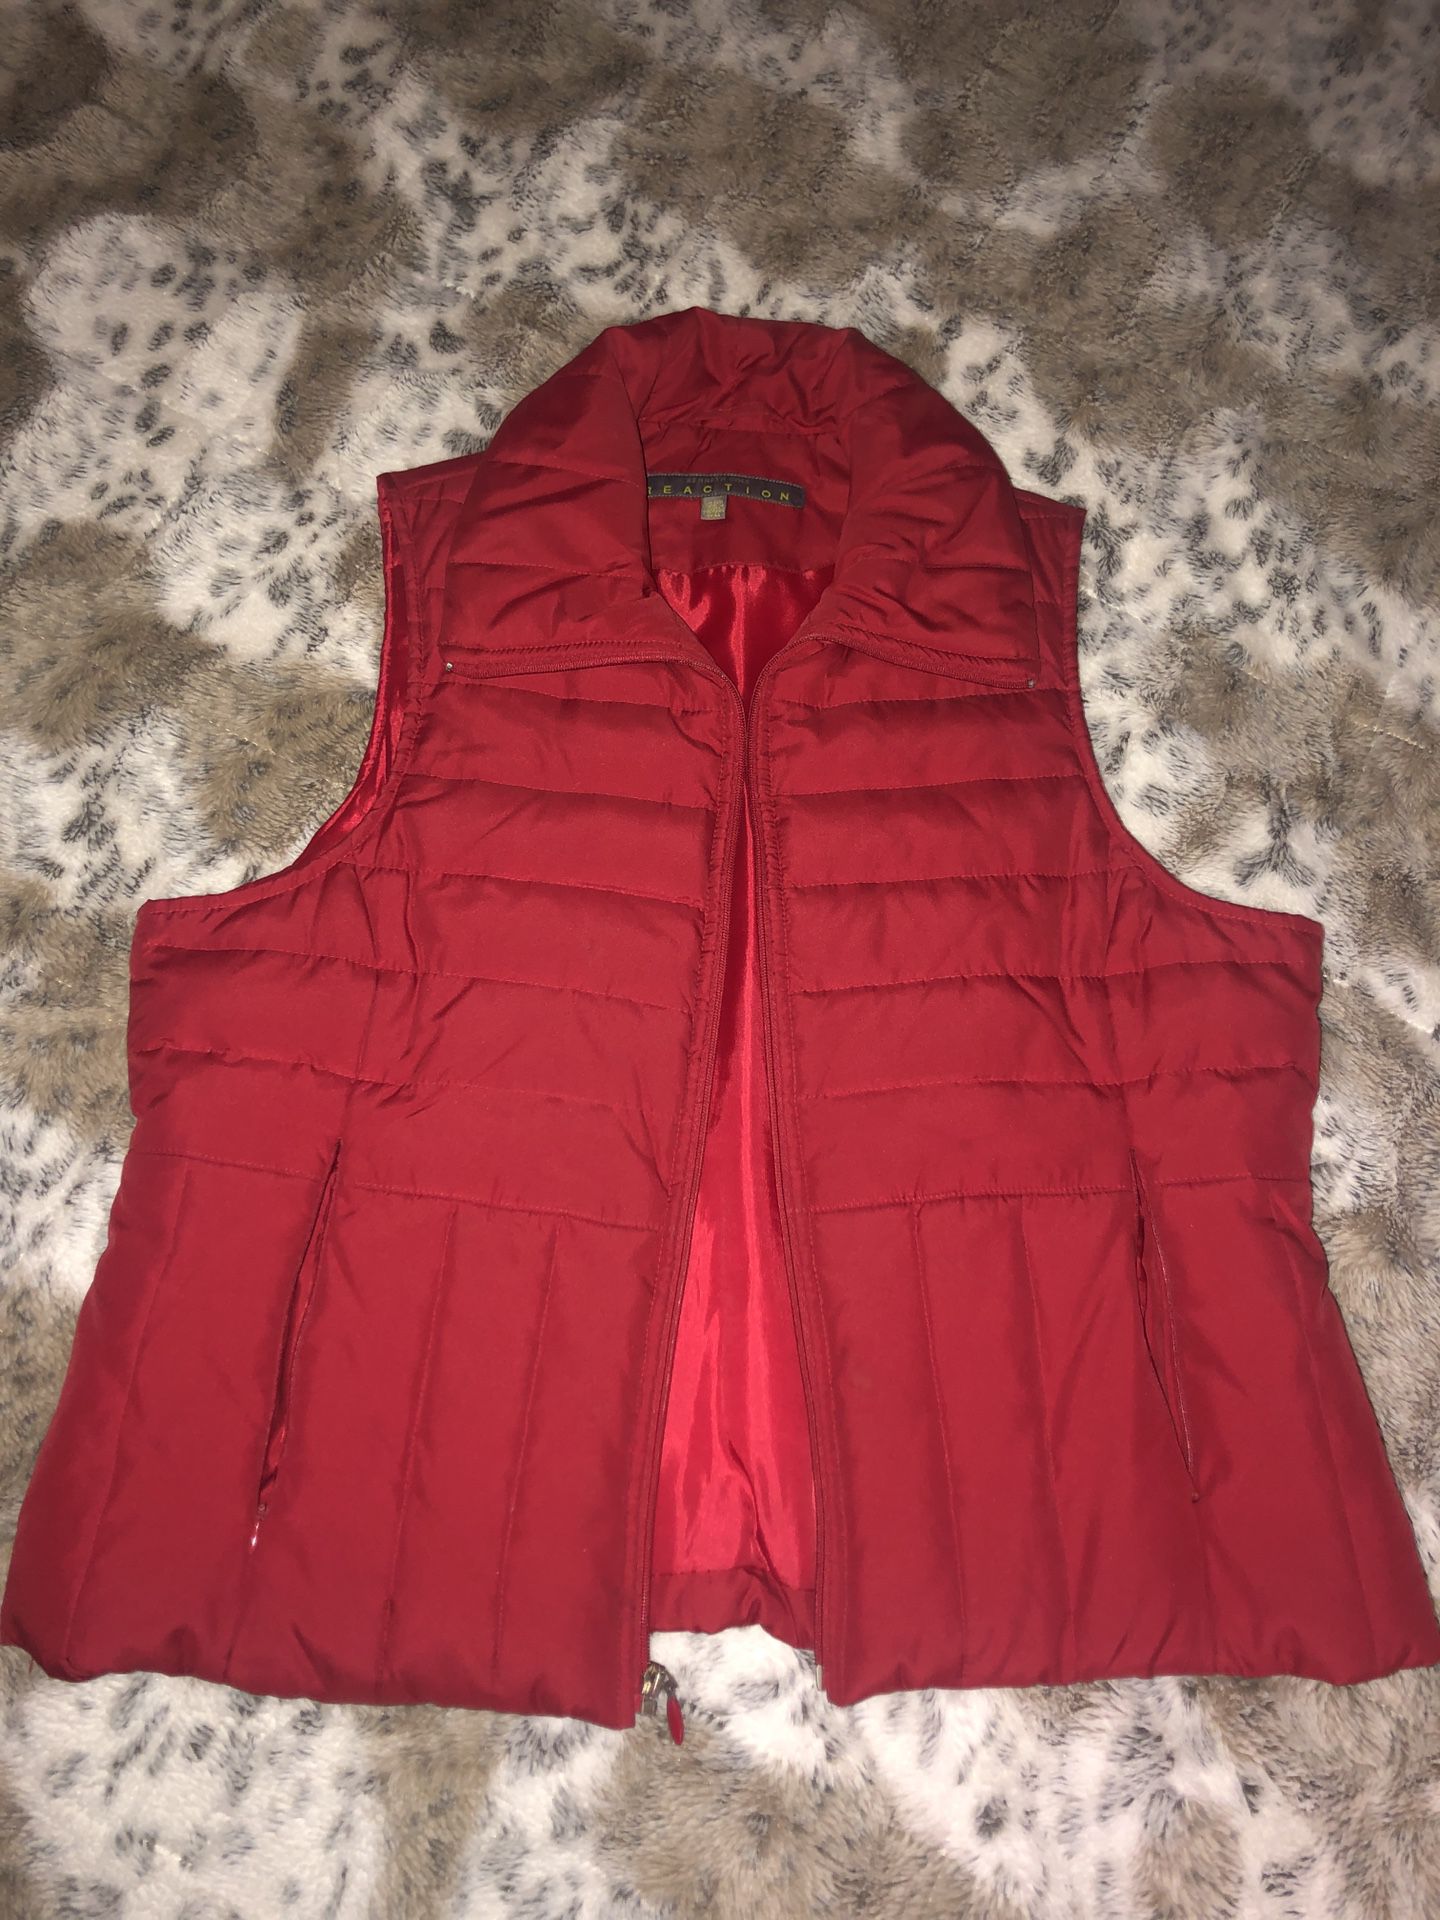 Women’s XL red puffer vest – Kenneth Cole